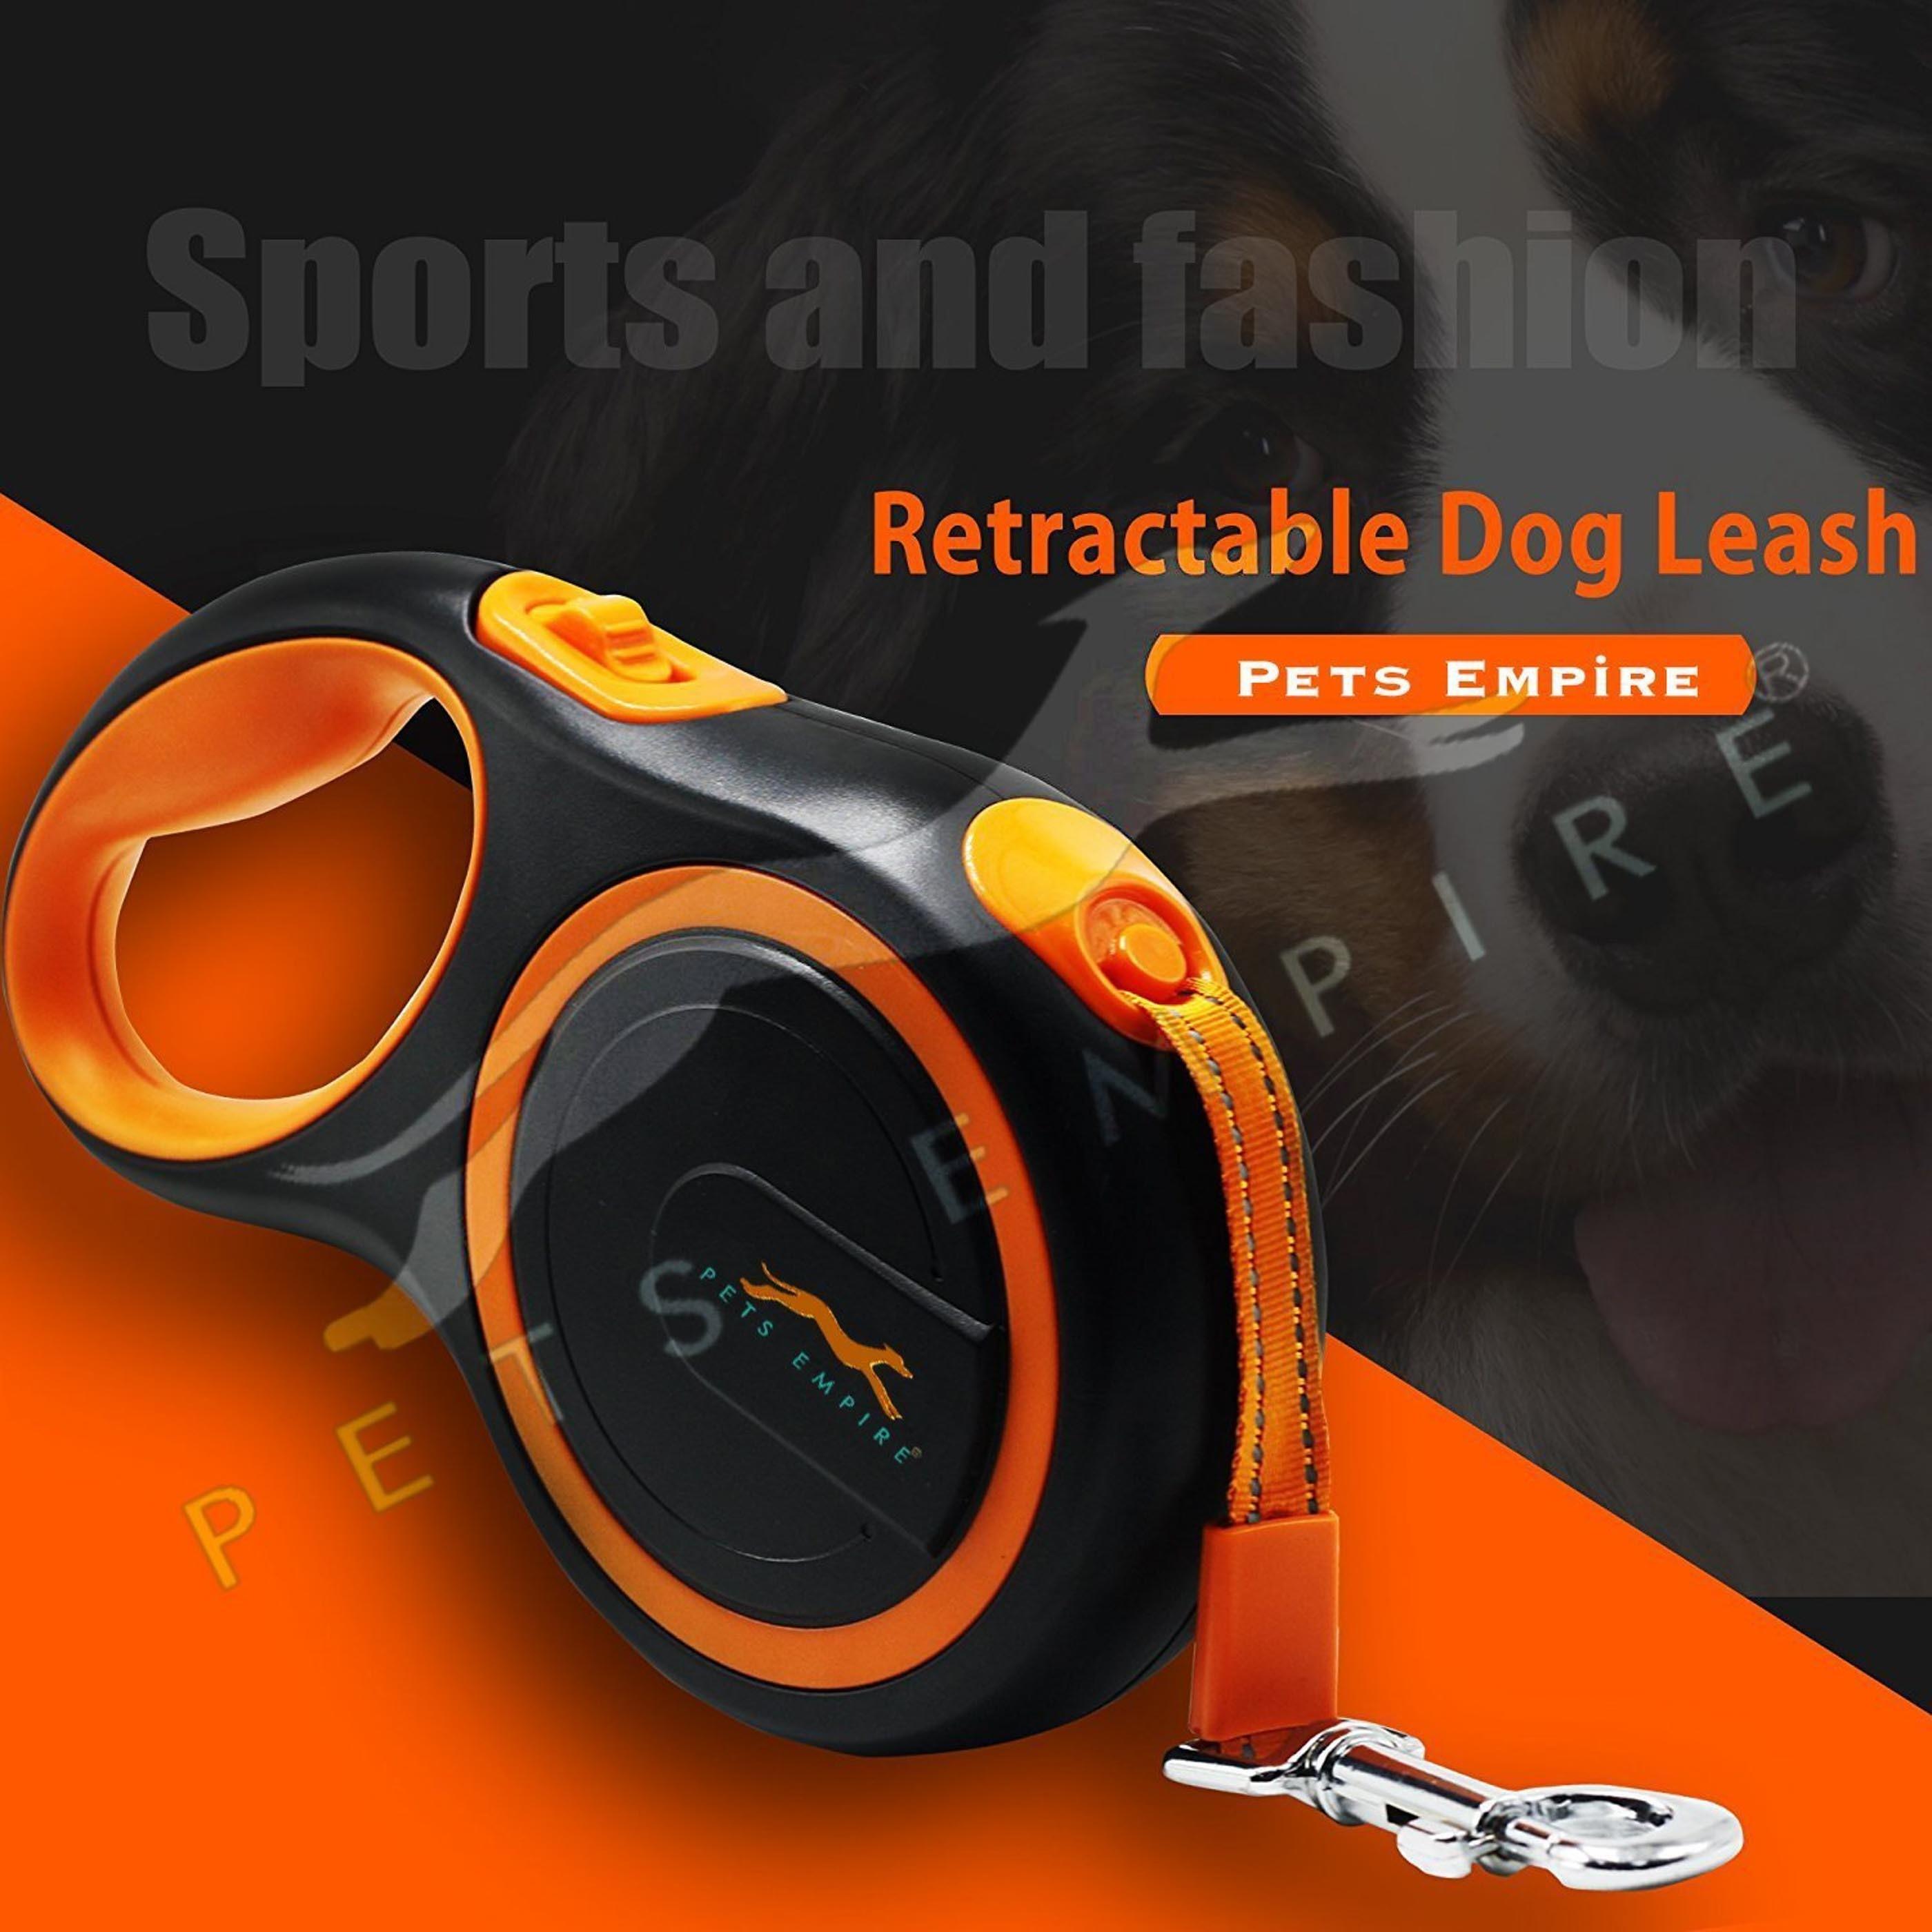 Petderland Fashionable Stylish Cute Retractable Pet Walking Leash 16ft Colorful Automatic Extendable Traction Leash for Dogs/Cats/Rabbits/Pets with Tension up to 30LBs 